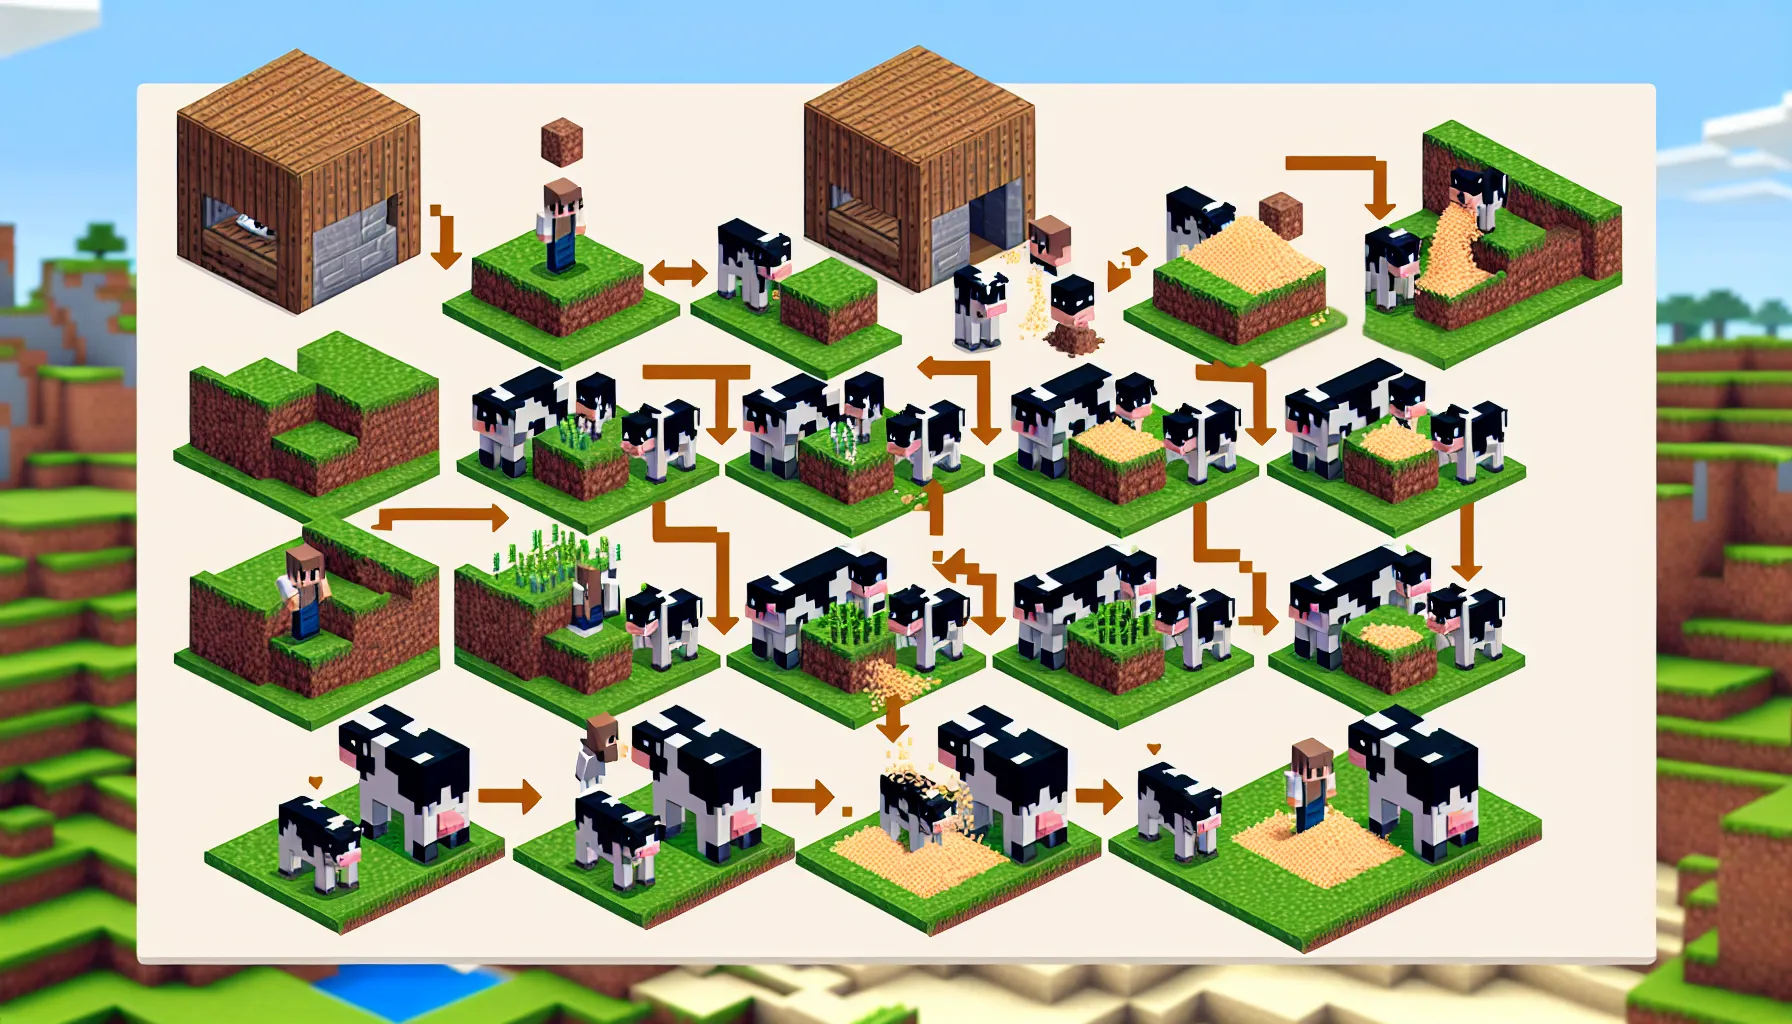 How to Breed Cows in Minecraft - Farm Guide